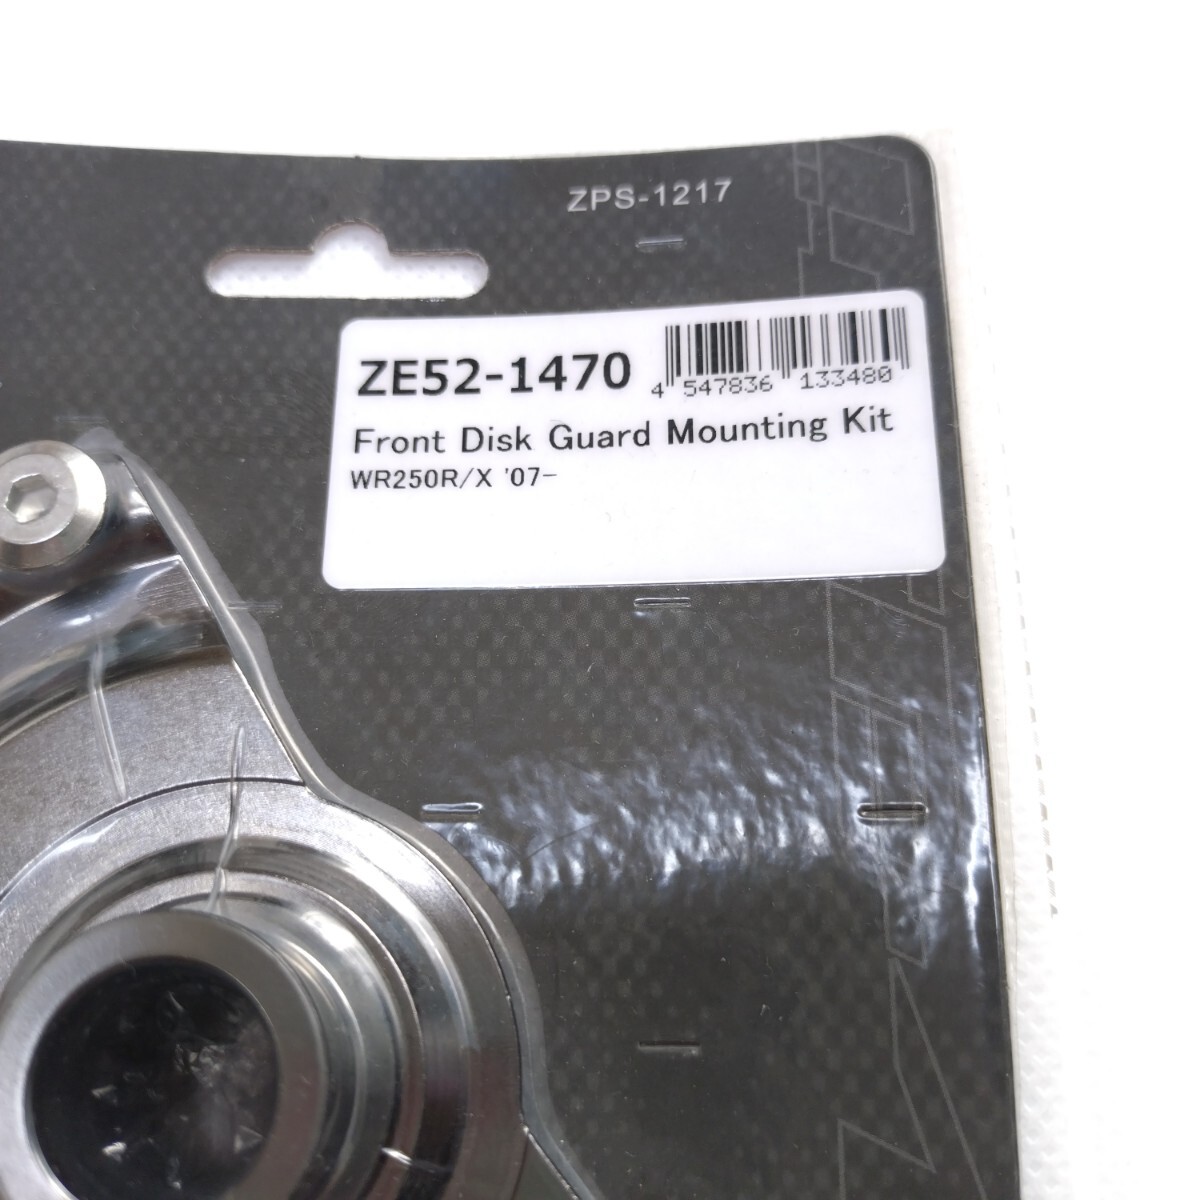 CR WR 125 300 TC TE 250 511 \'09-\'11 ZETA front disk guard for mounting kit ZE52-1610 unused 